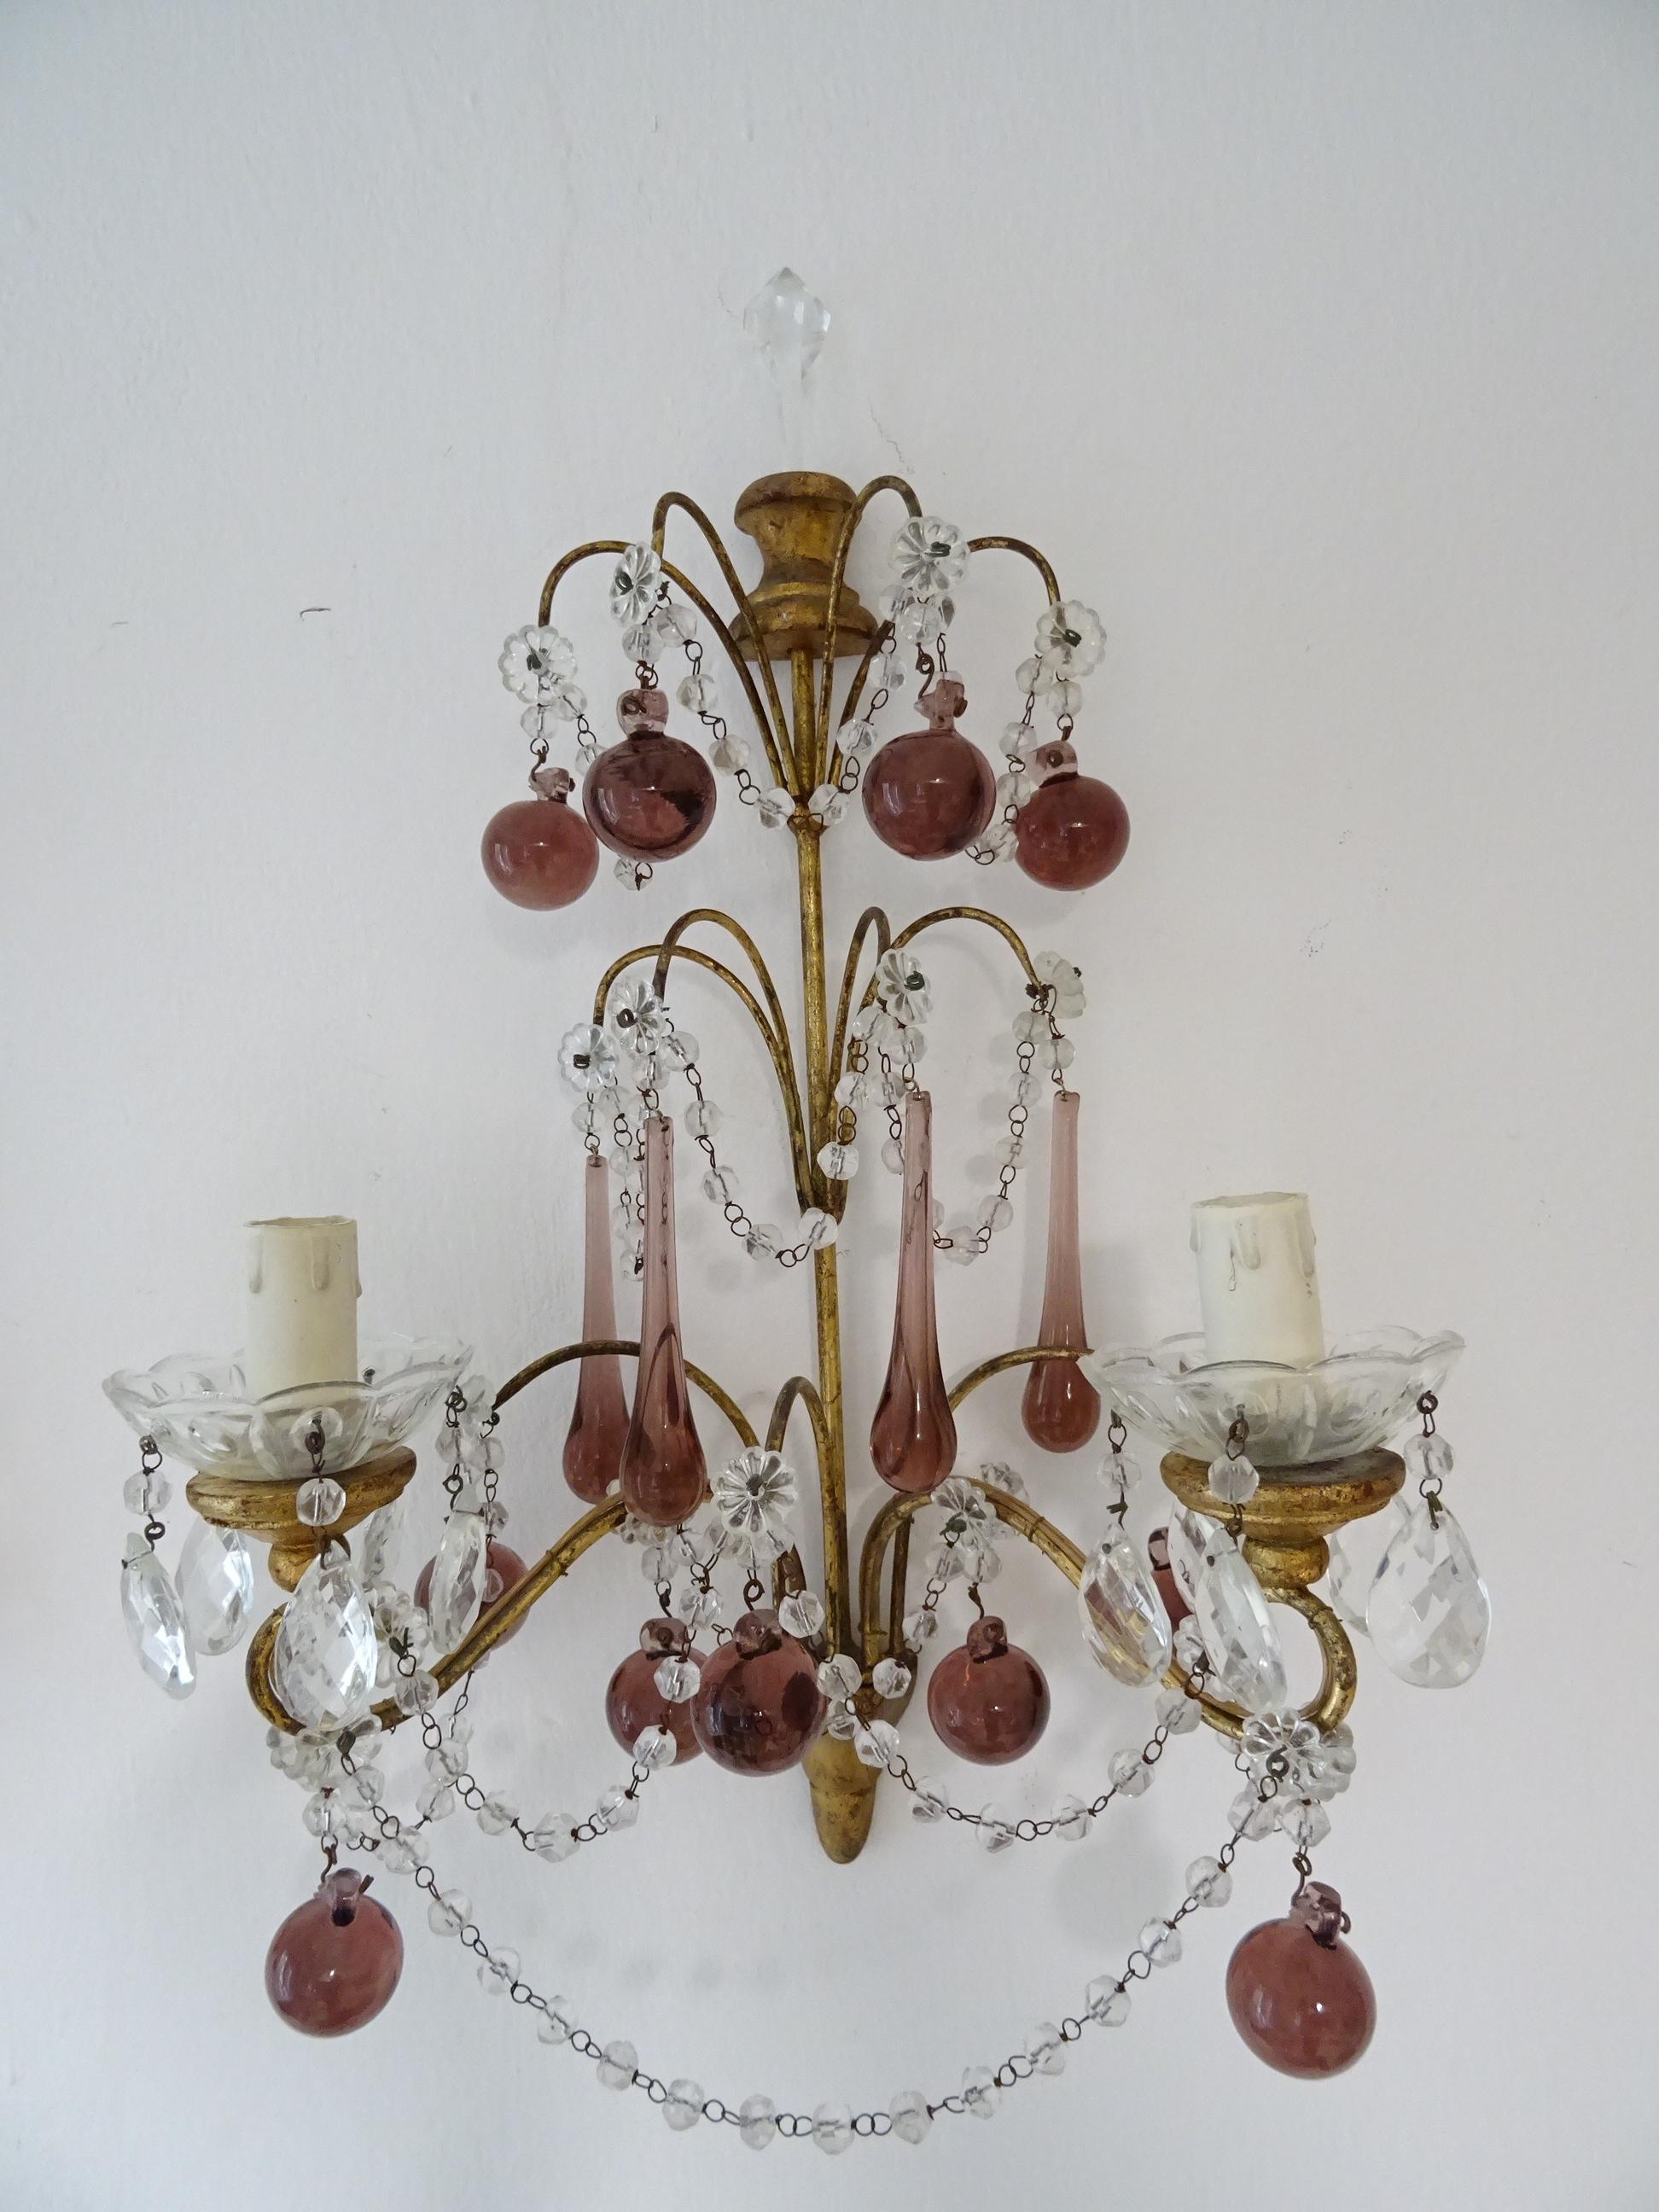 Early 20th Century French Gilt Wood Crystal Amethyst Murano Drops 3 Tier with Spear Sconces c 1900 For Sale